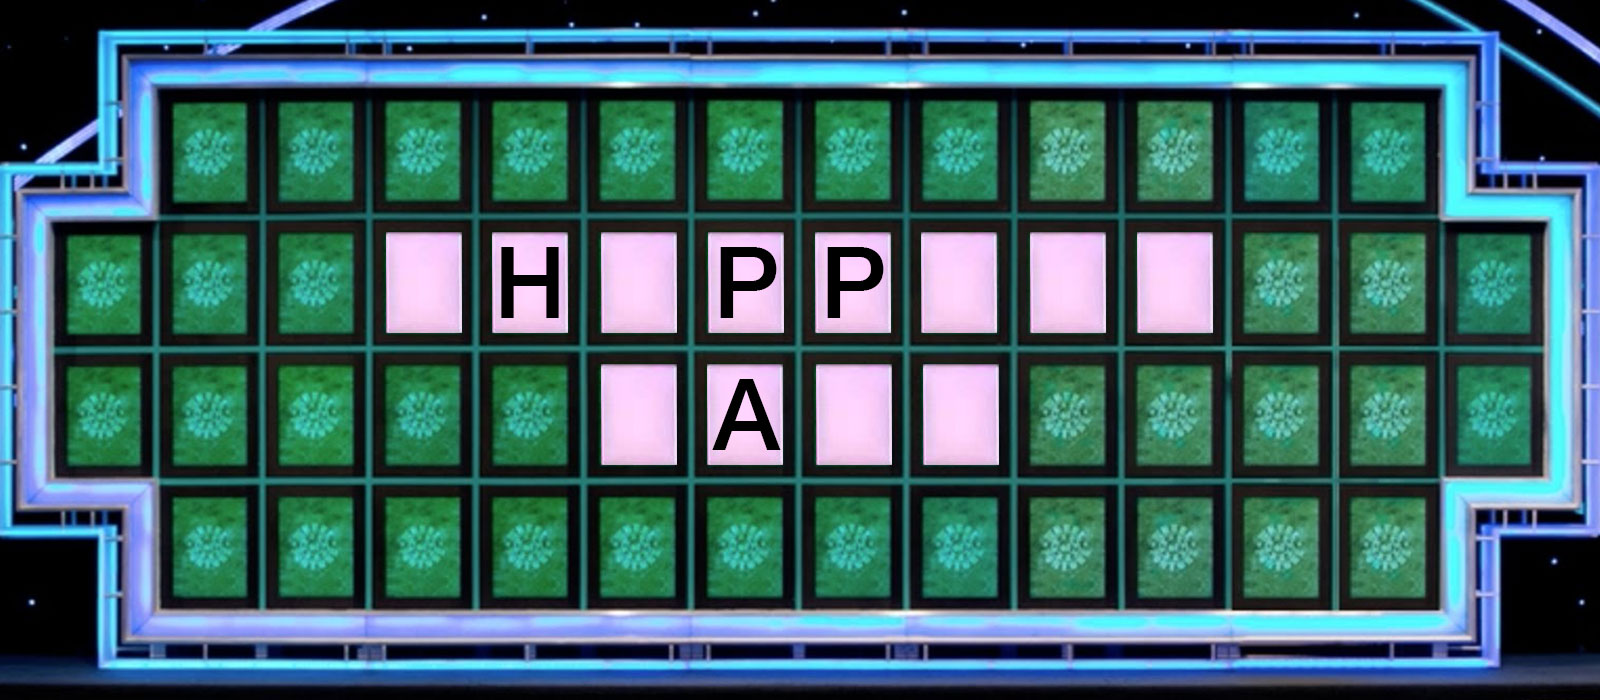 Can You Solve These Wheel of Fortune Puzzles? 418